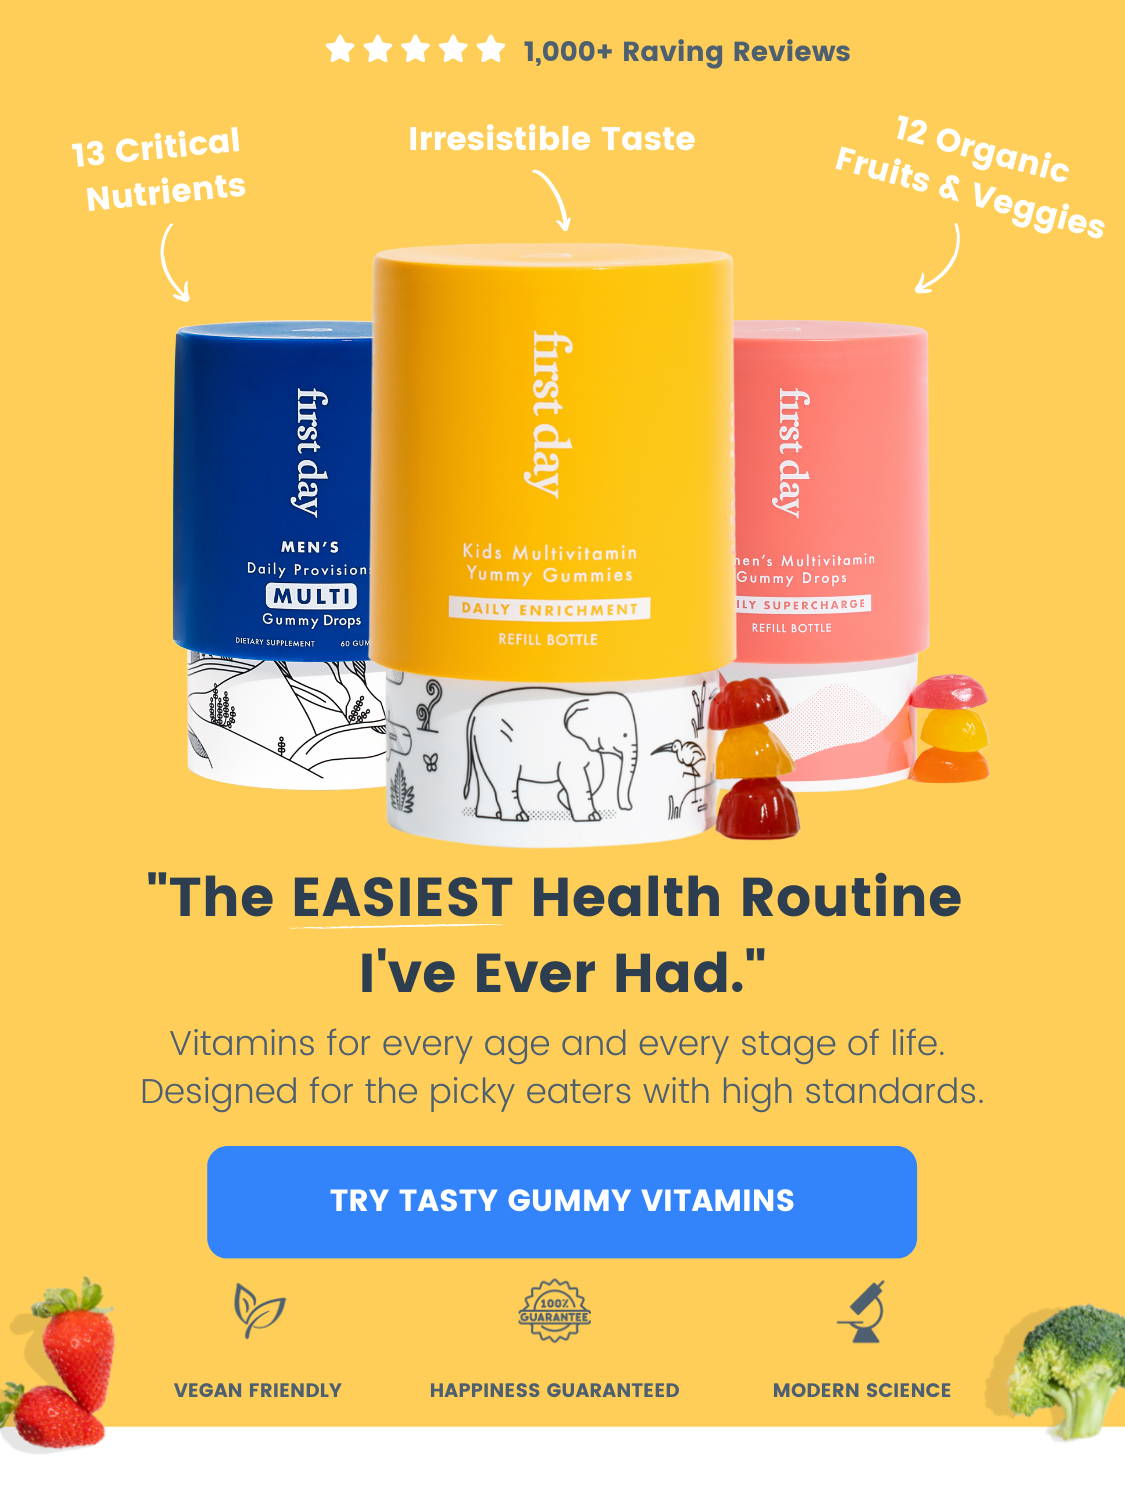 Introducing First Day vitamins. Many people say it's the easiest health routine they ever had. Click to shop now